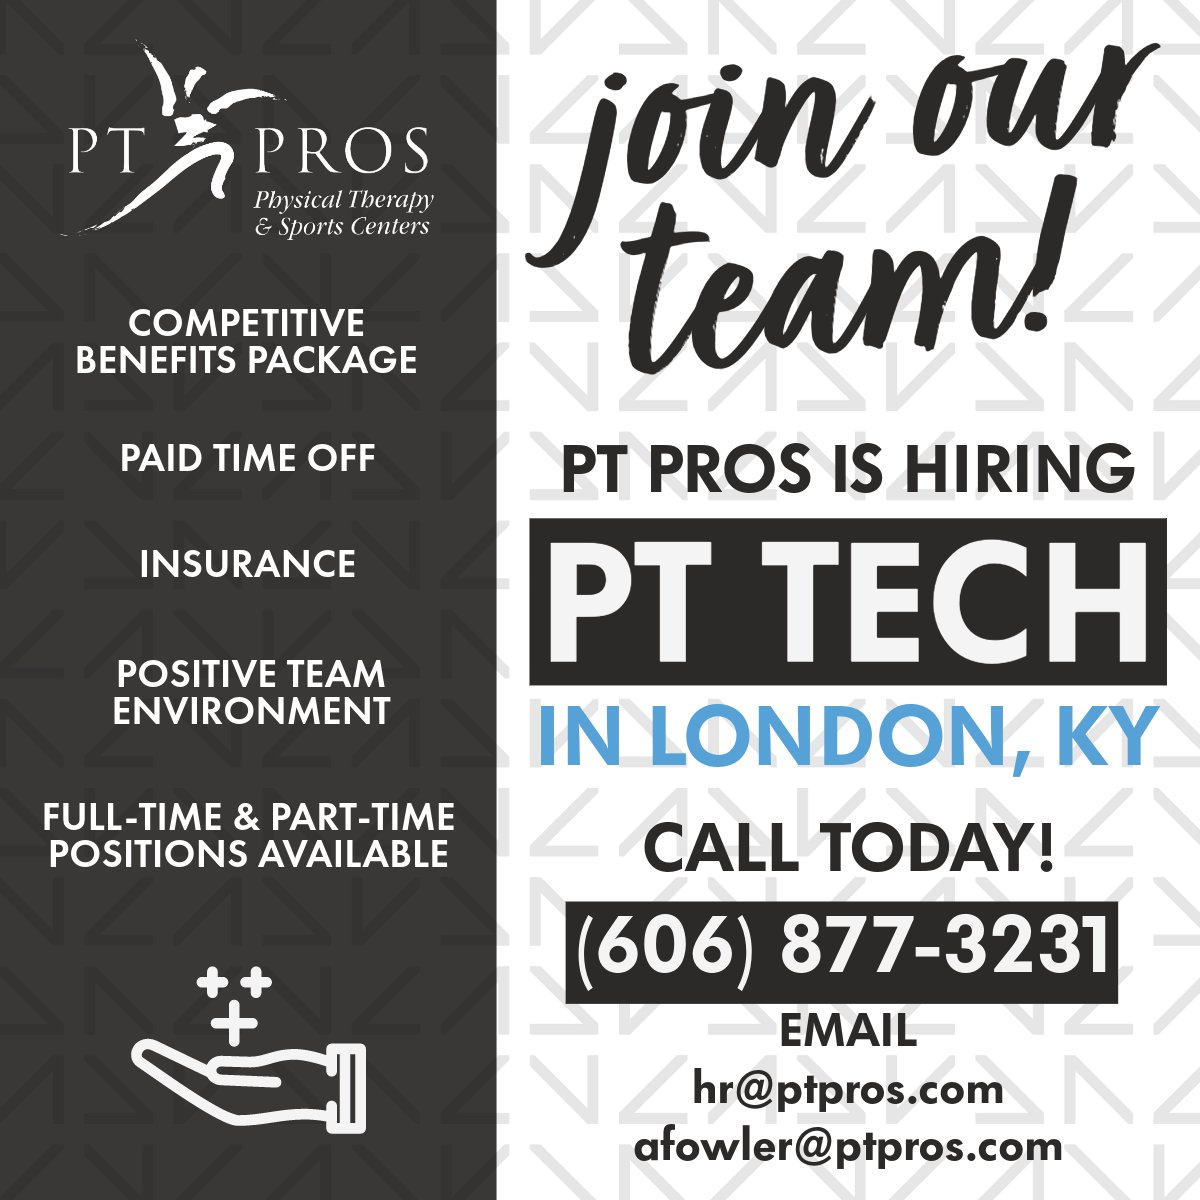 PT Pros London is hiring for a PT tech position. If you're looking to join a great team with excellent benefits, contact us today! #GetMoving #NowHiring #LondonKY #YourTeamIsHere #PhysicalTherapy